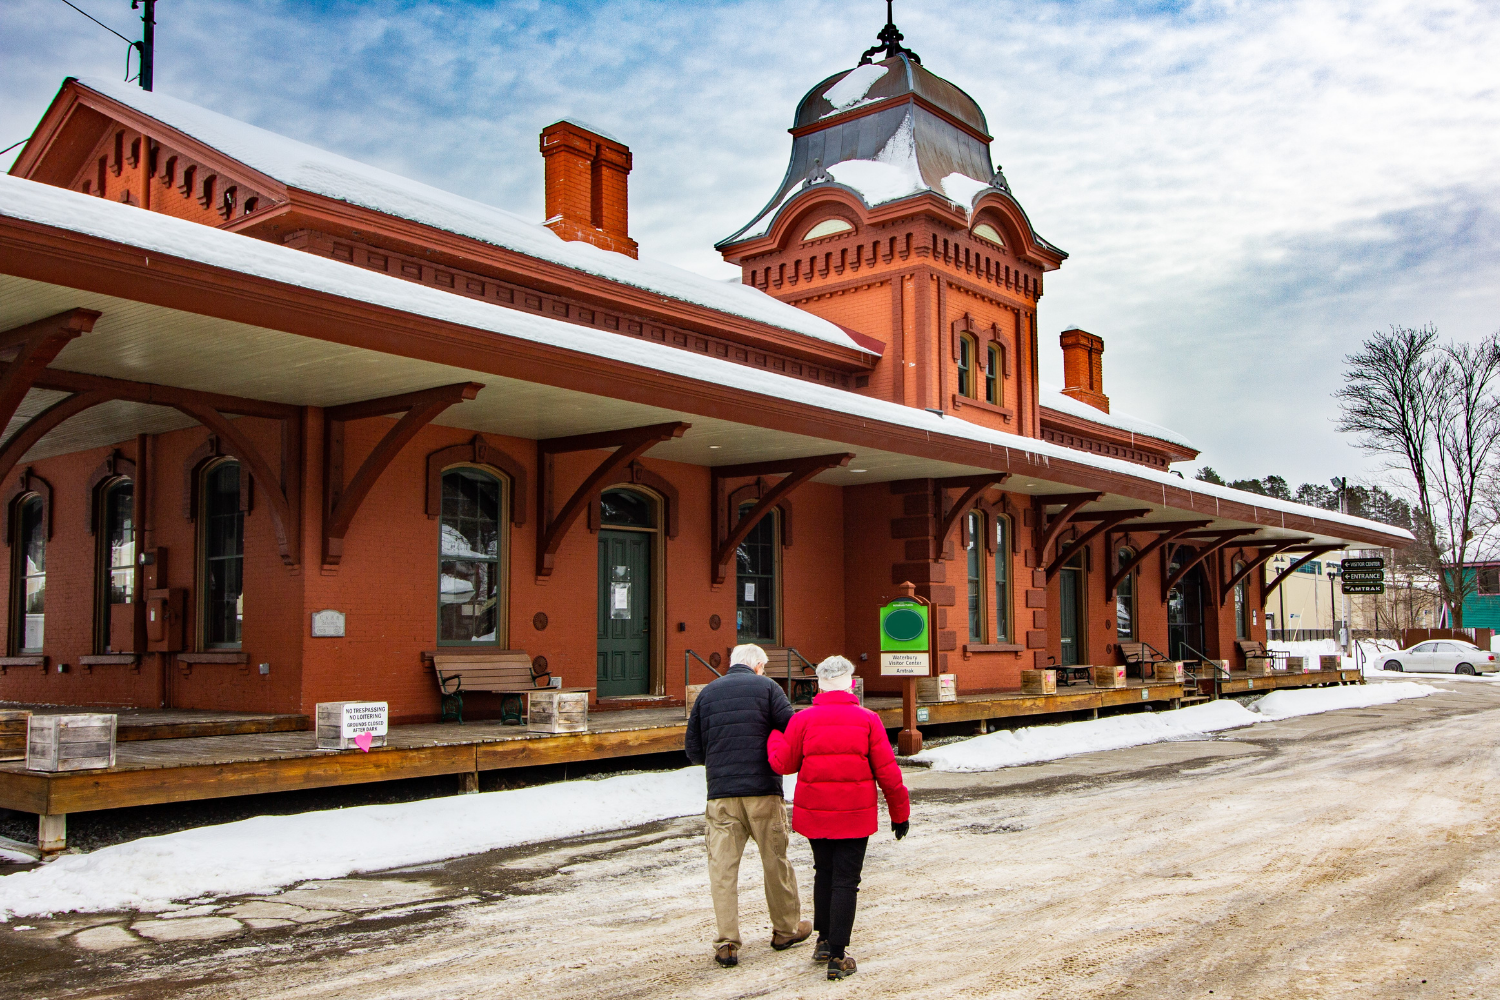 Individuals walking in front of the historic Waterbury Train Station